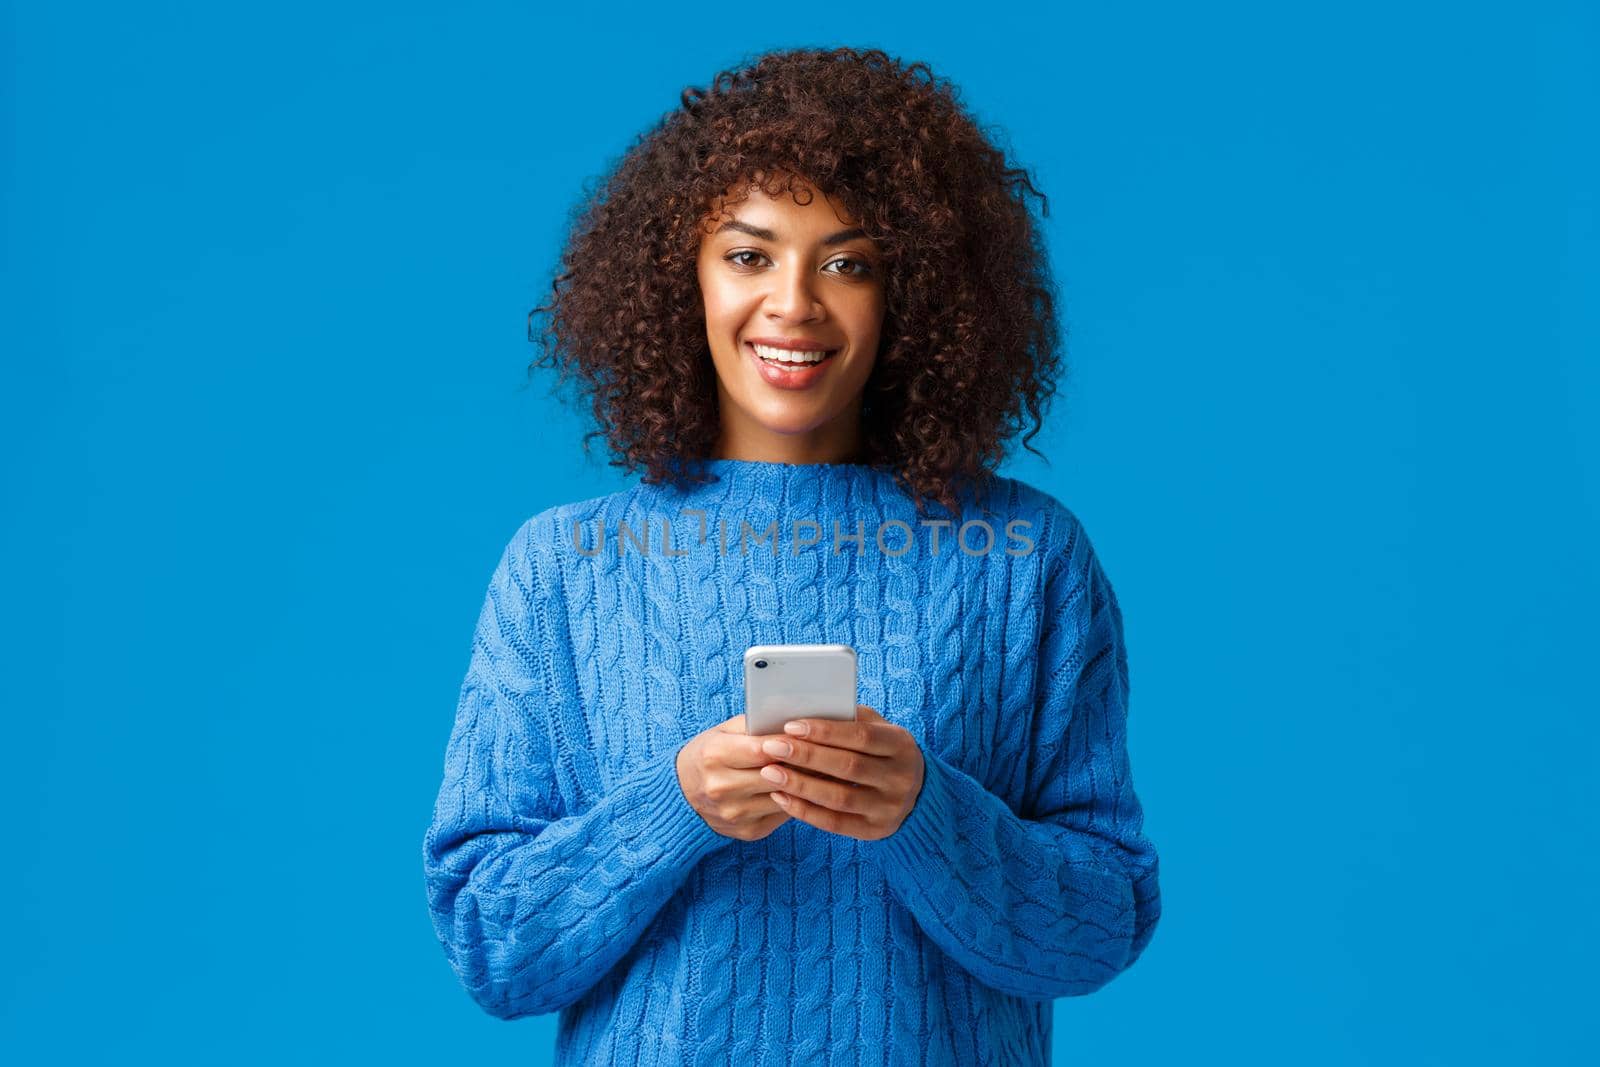 Smartphone addication, gen-z and people concept. Charismatic lovely smiling african-american woman with afro haircut in winter sweater, holding smartphone and looking camera, blue background.